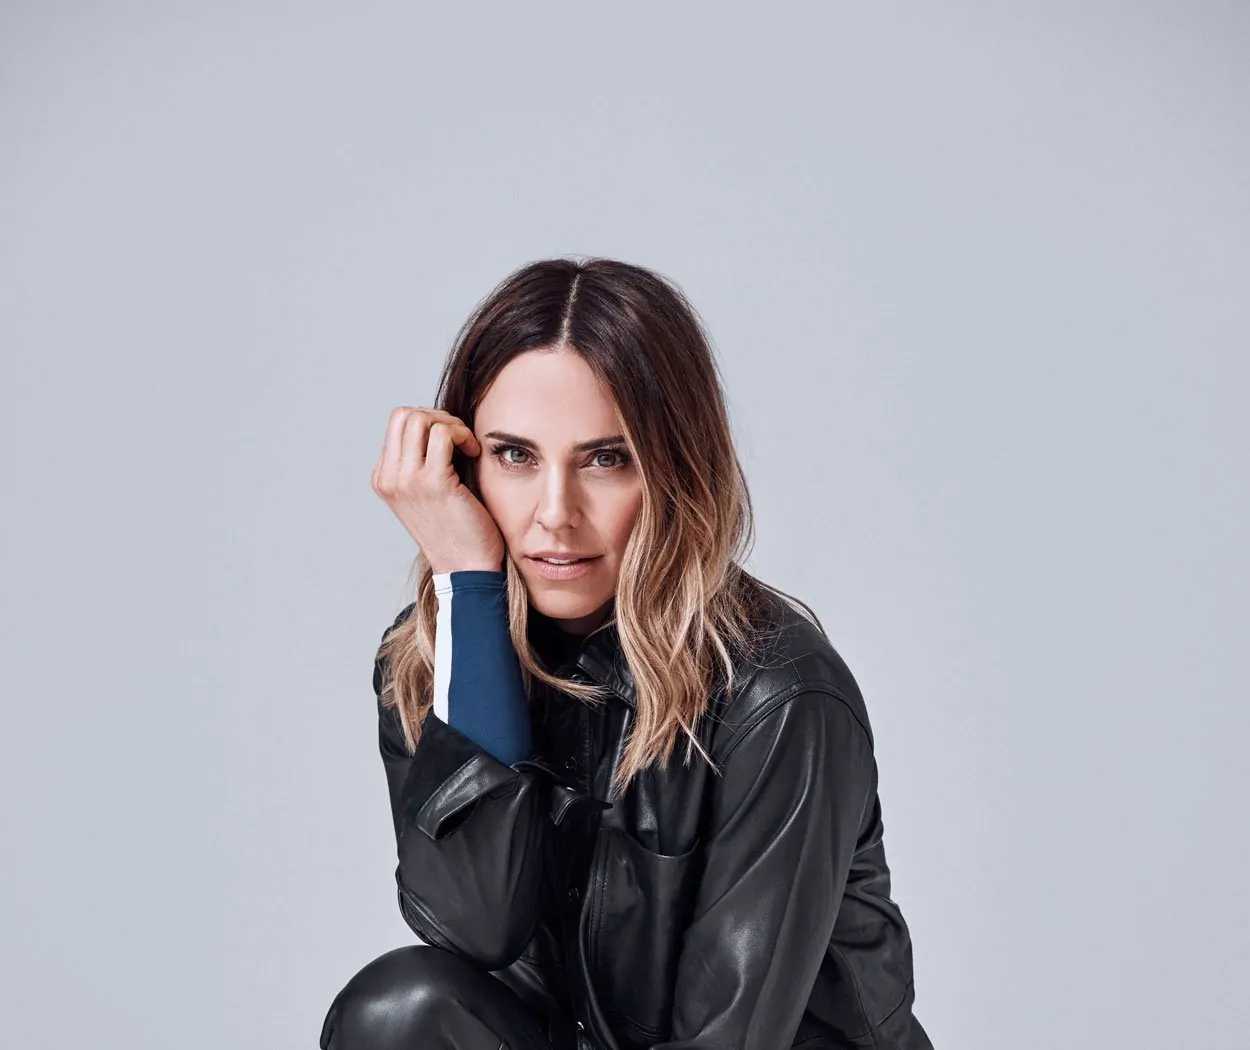 MELANIE C returns with brand new single, ‘High Heels’ (with Sink The Pink)